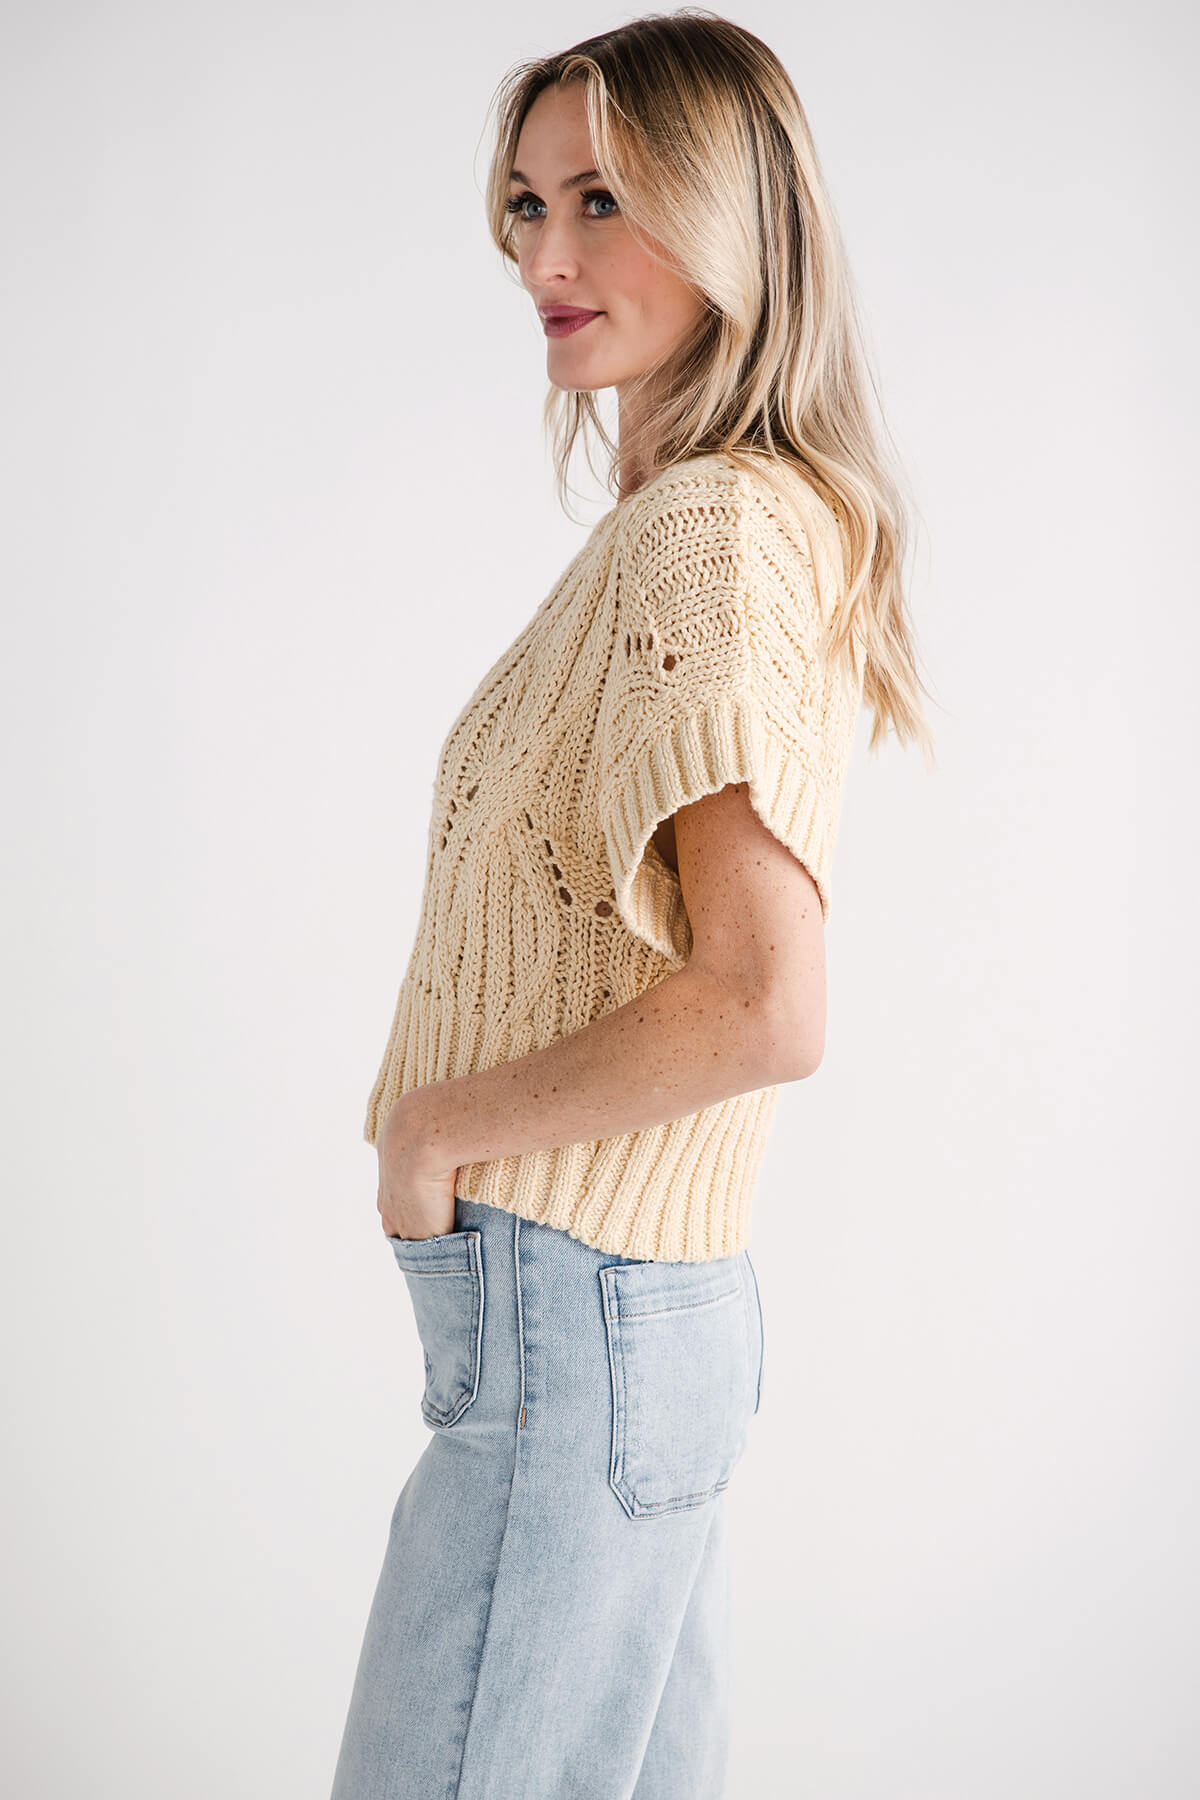 By Together Cali Crochet Top